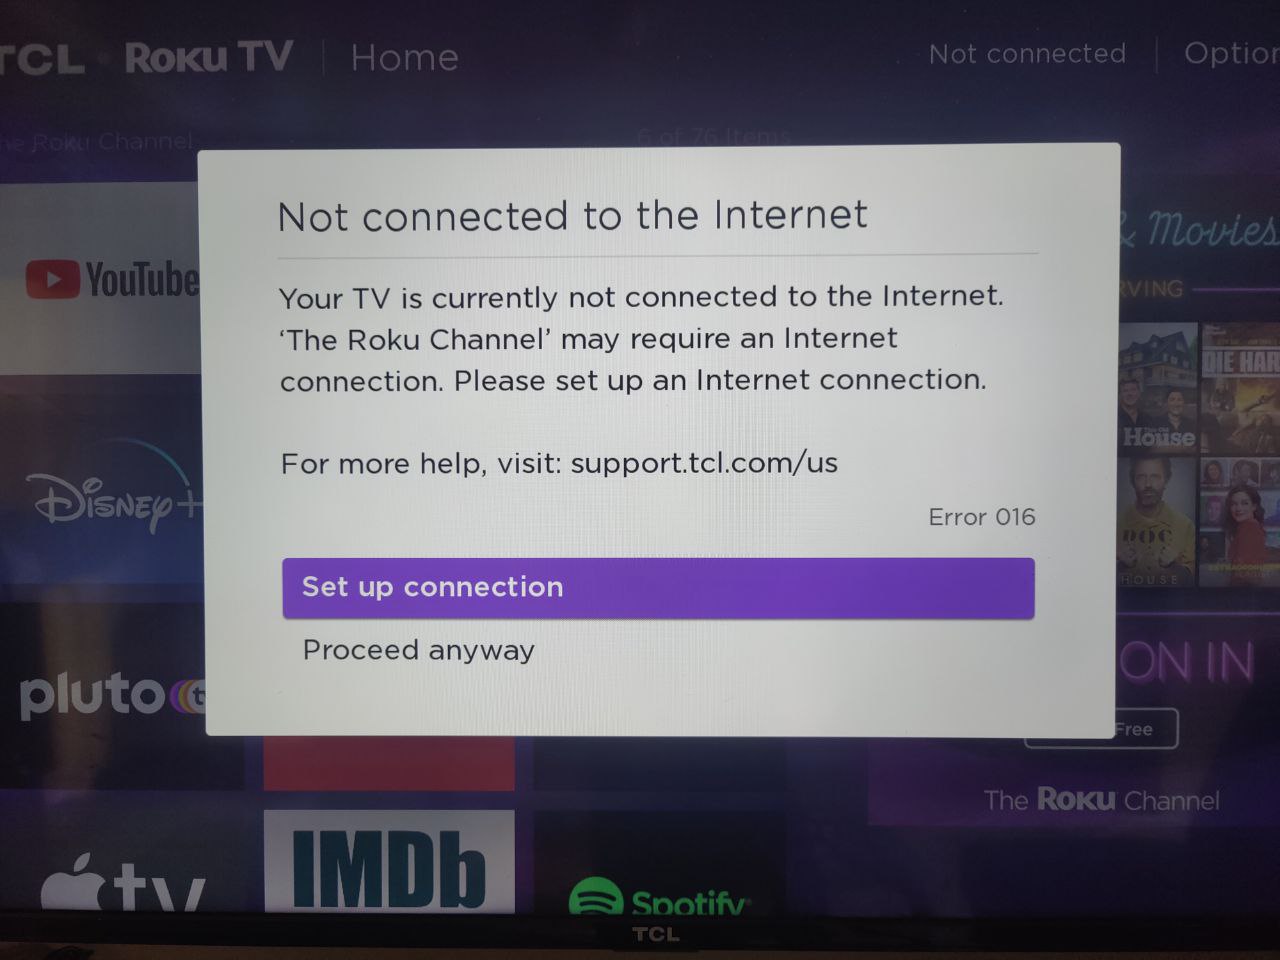 Ensure that your Roku device is connected to the internet.
Verify that other devices on the same network can access the internet.